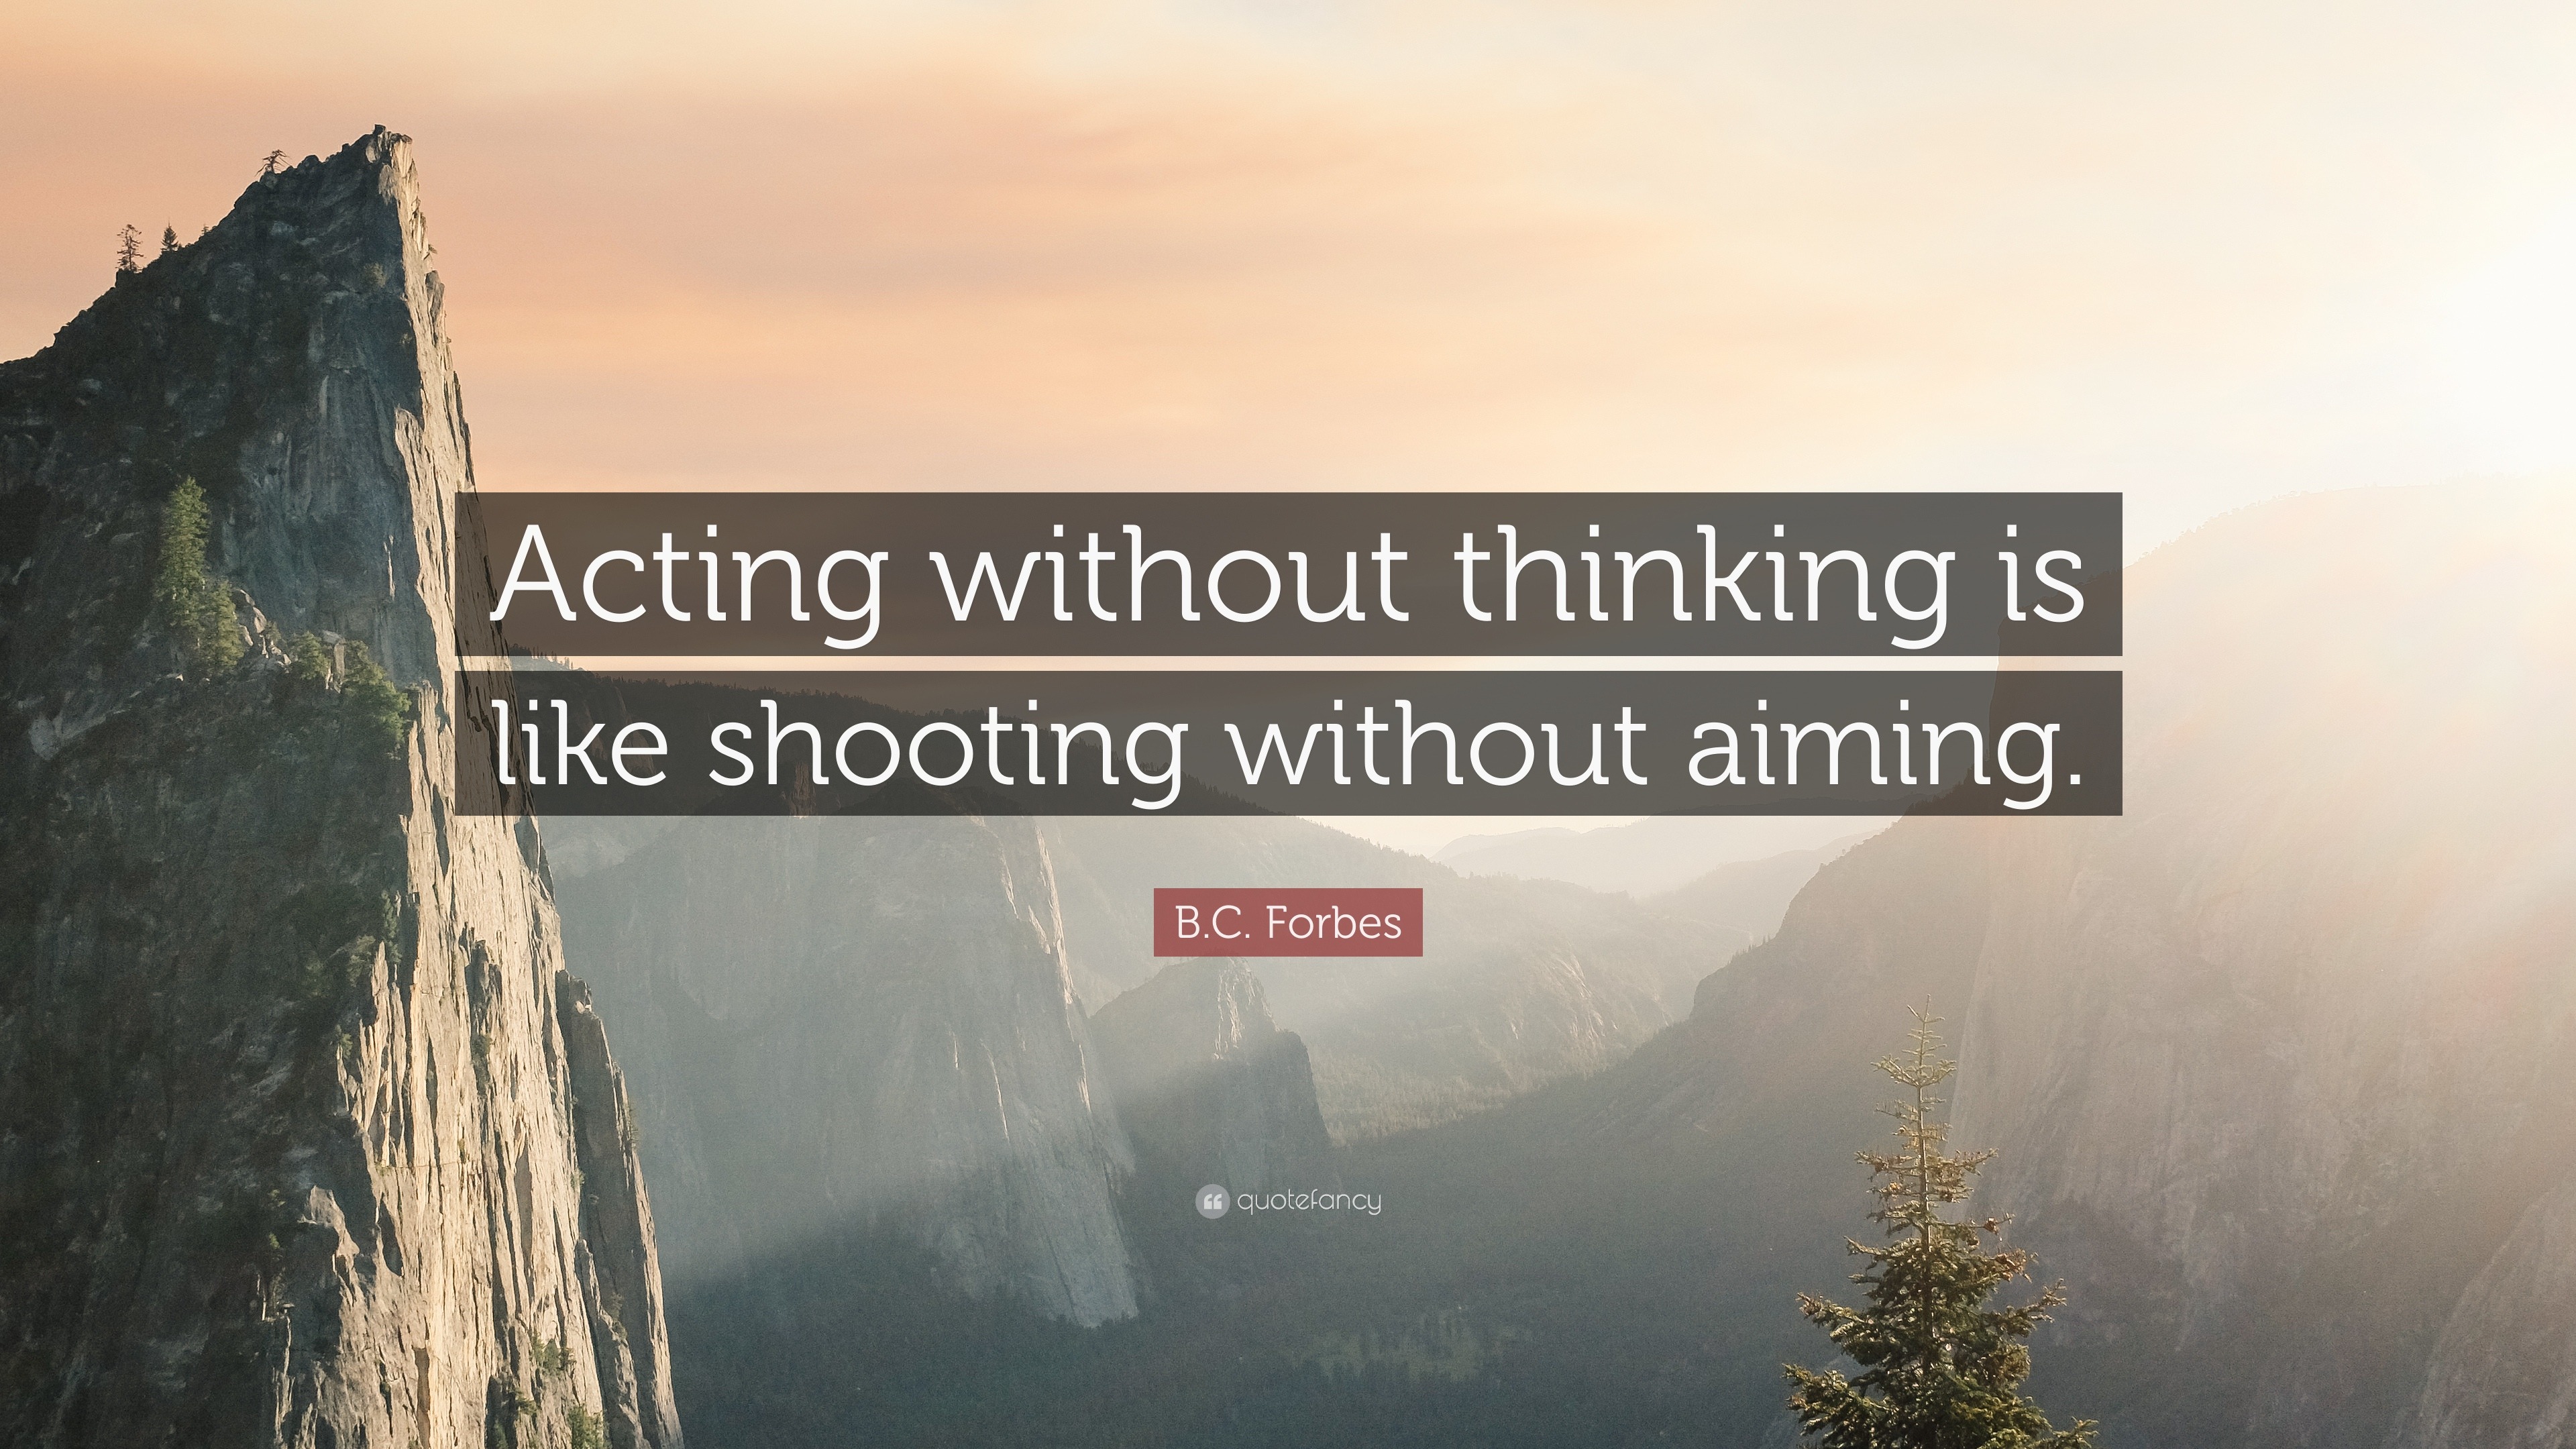 B C Forbes Quote: Acting without thinking is like shooting without